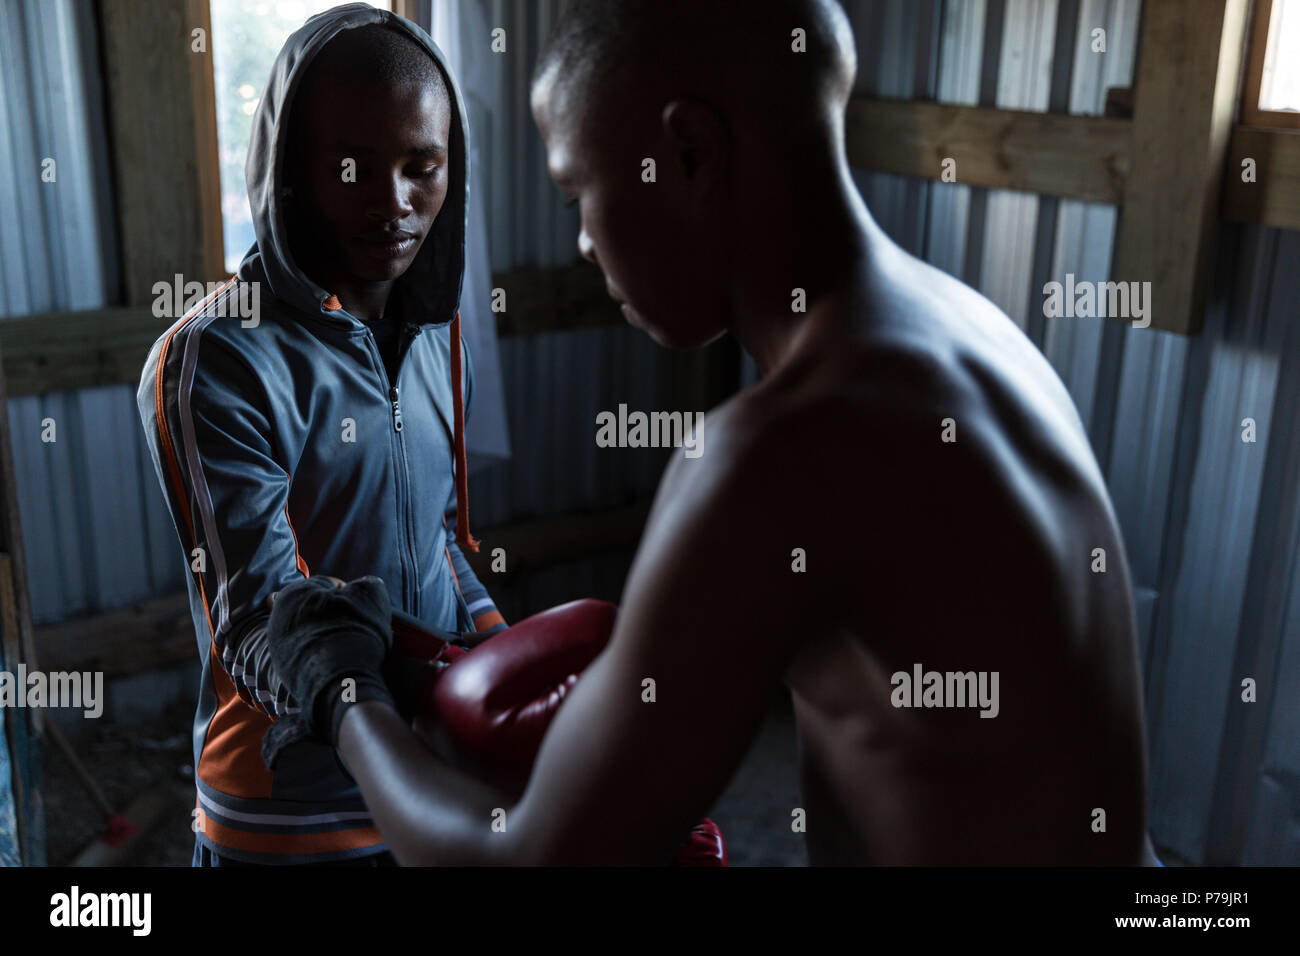 Trainer assisting male boxer in wearing boxing gloves Stock Photo